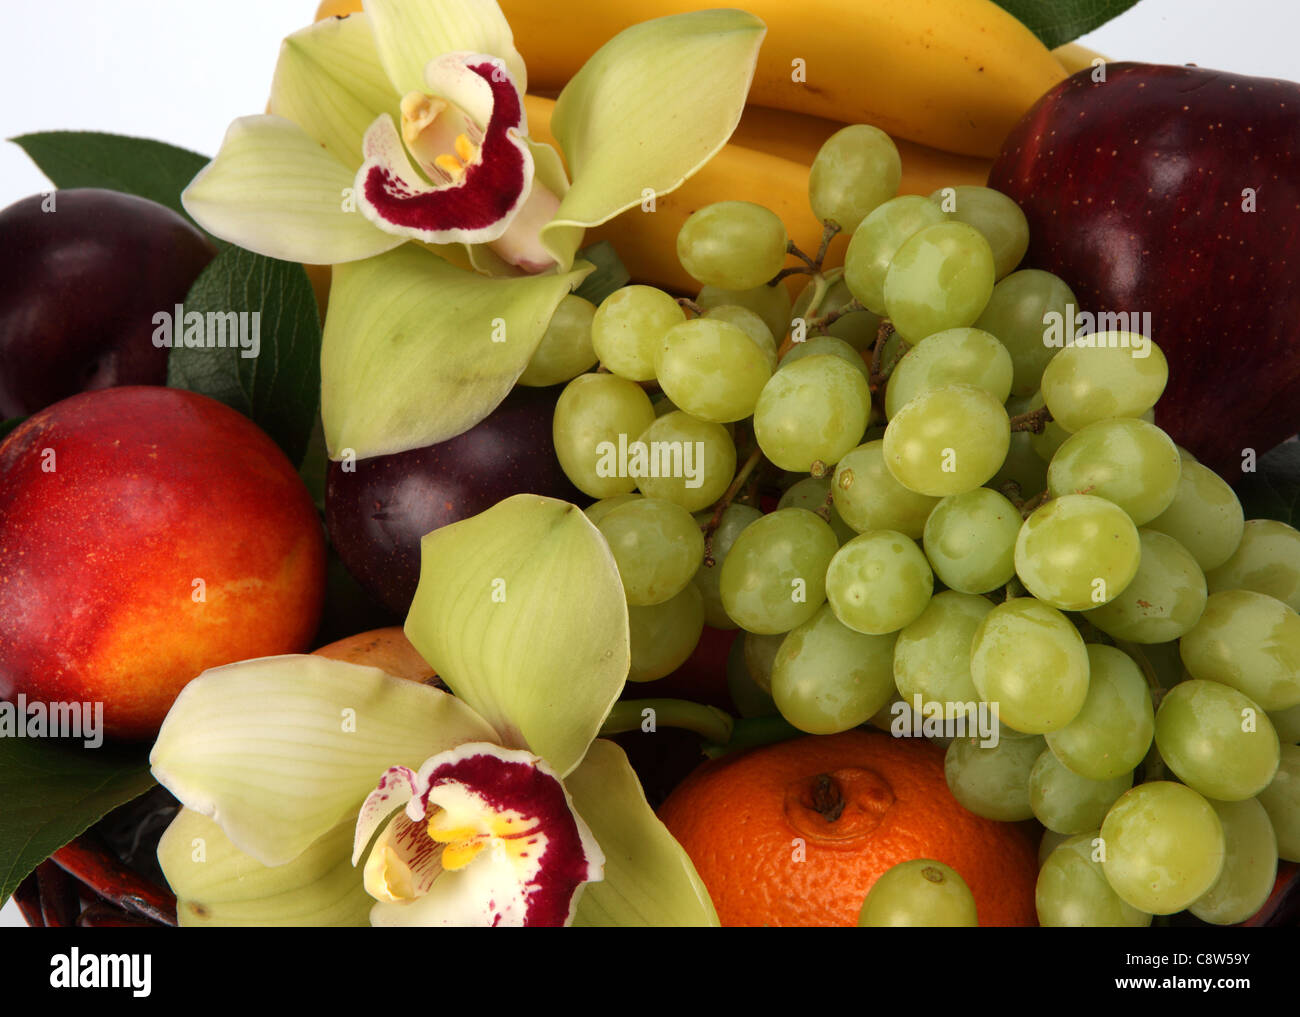 A close-up of a colorful bouquet of fruit and flowers. Stock Photo